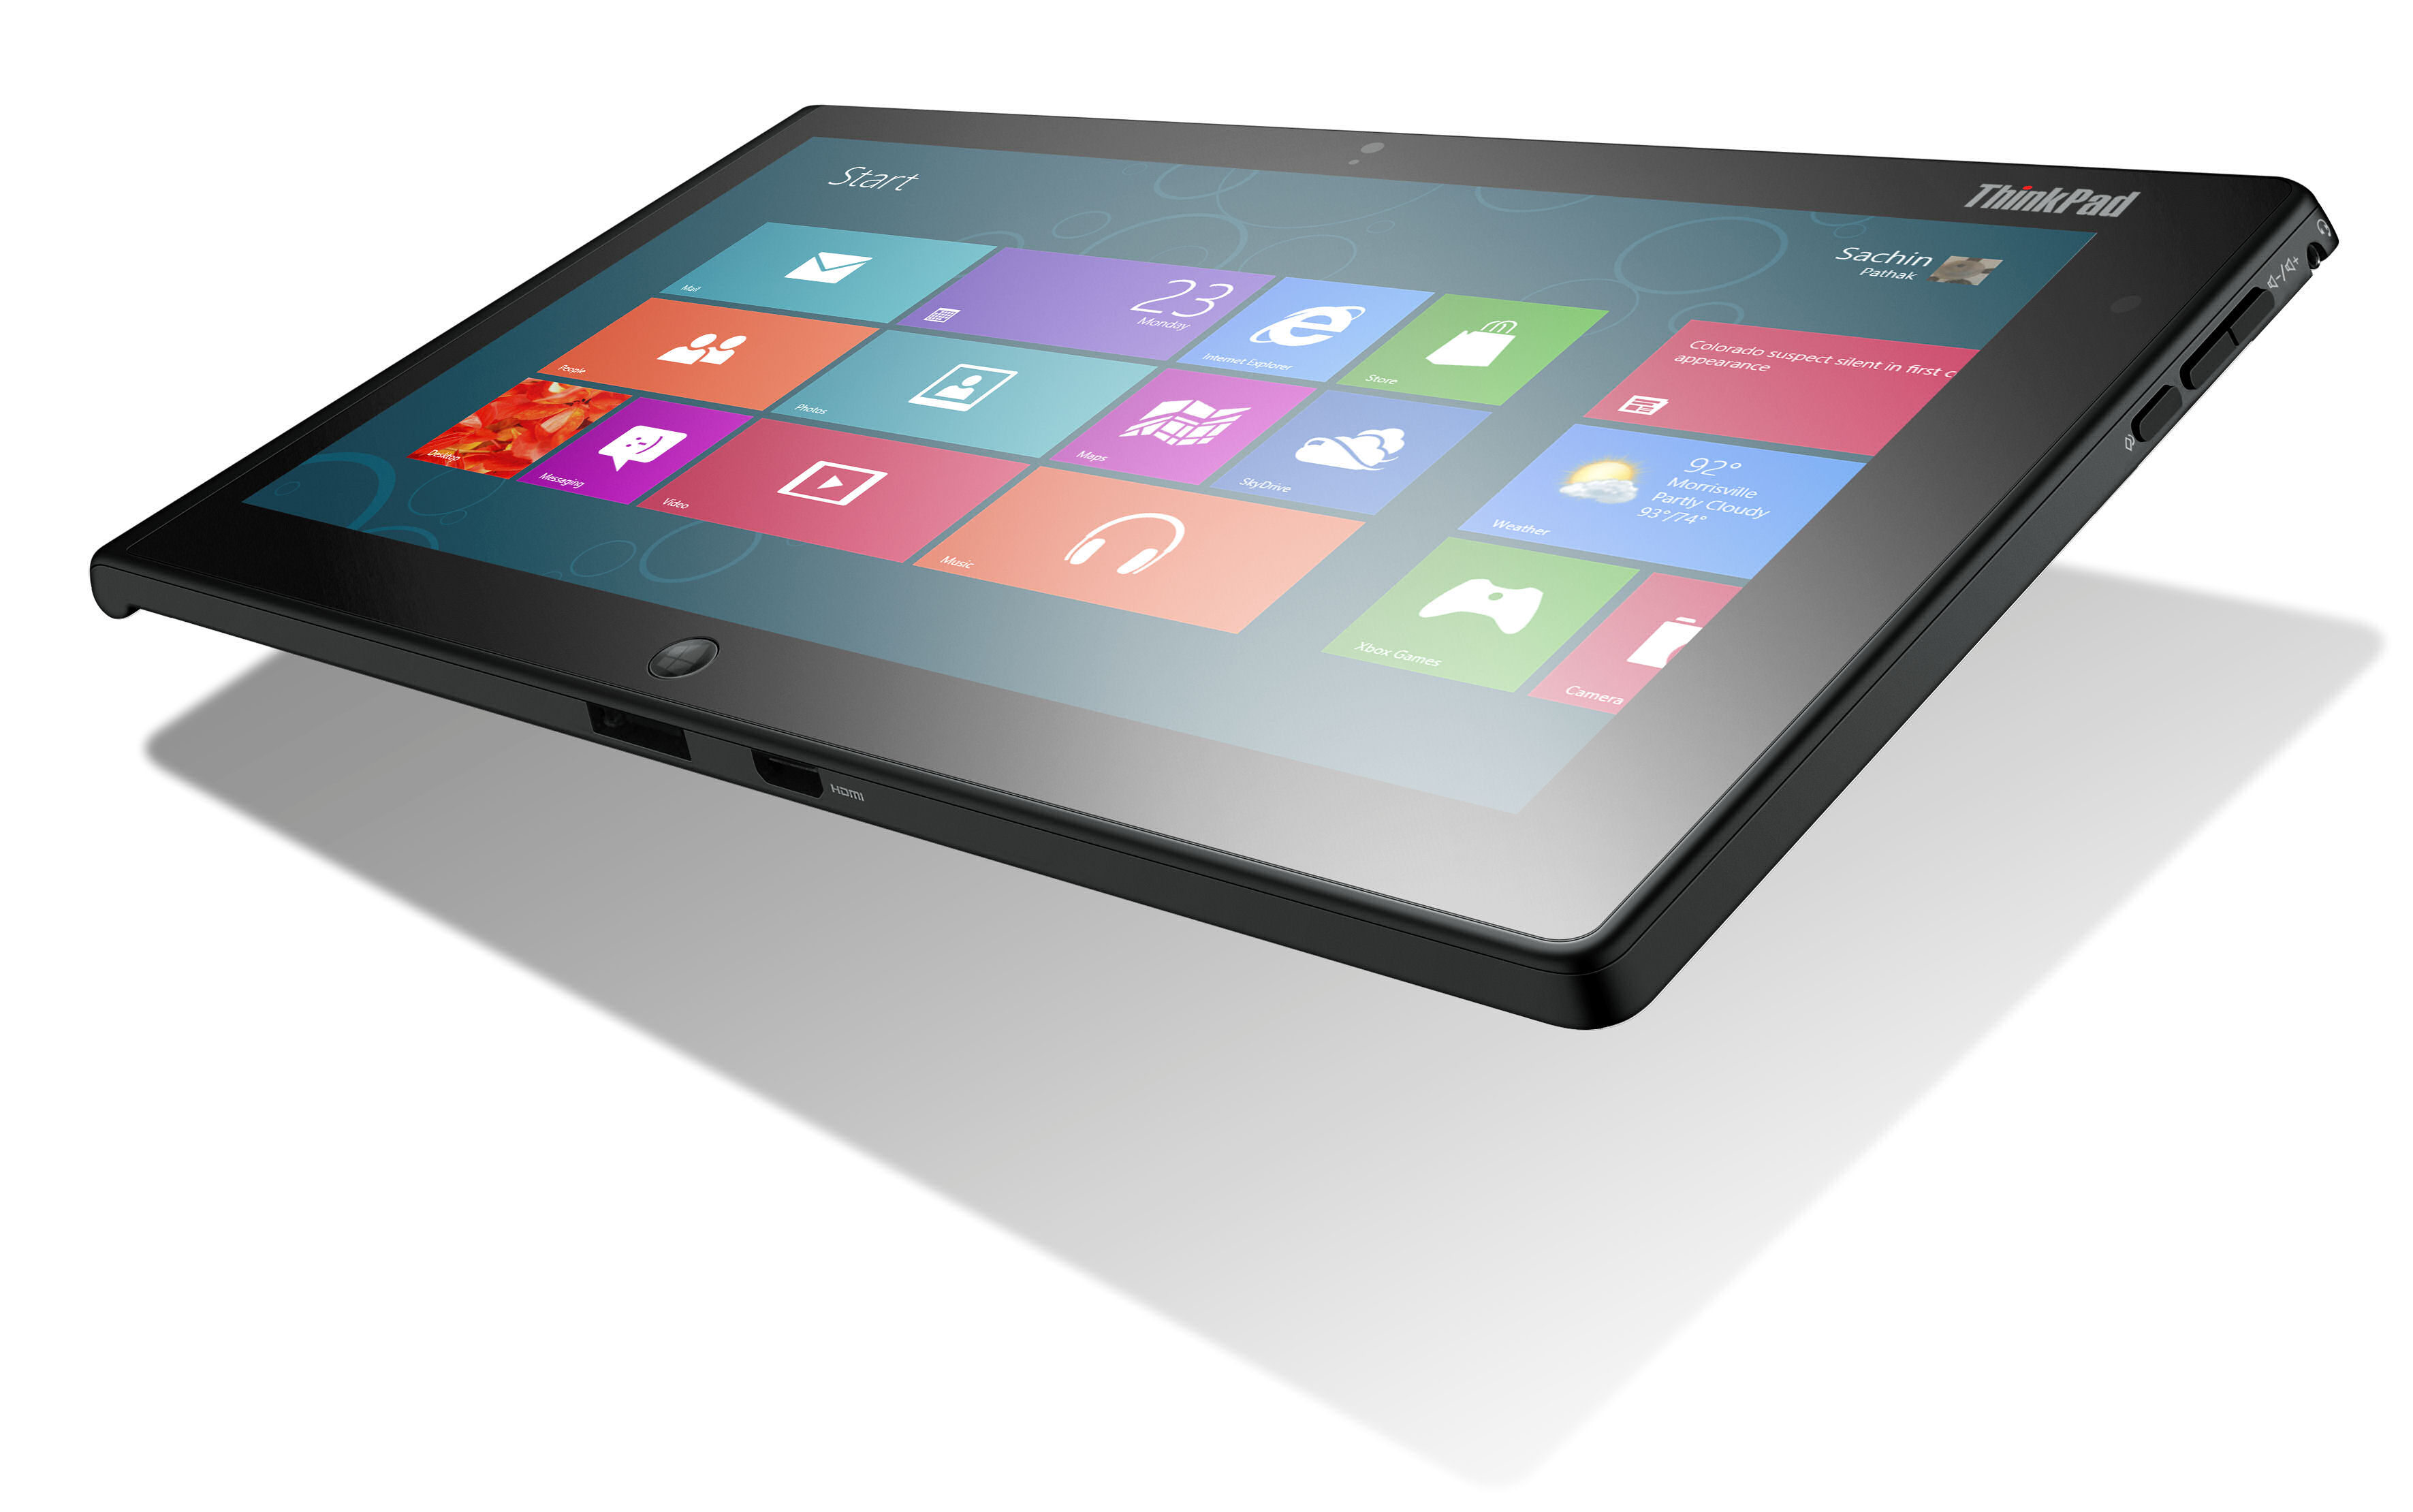 products_Thinkpad tablet_02_1113_1085